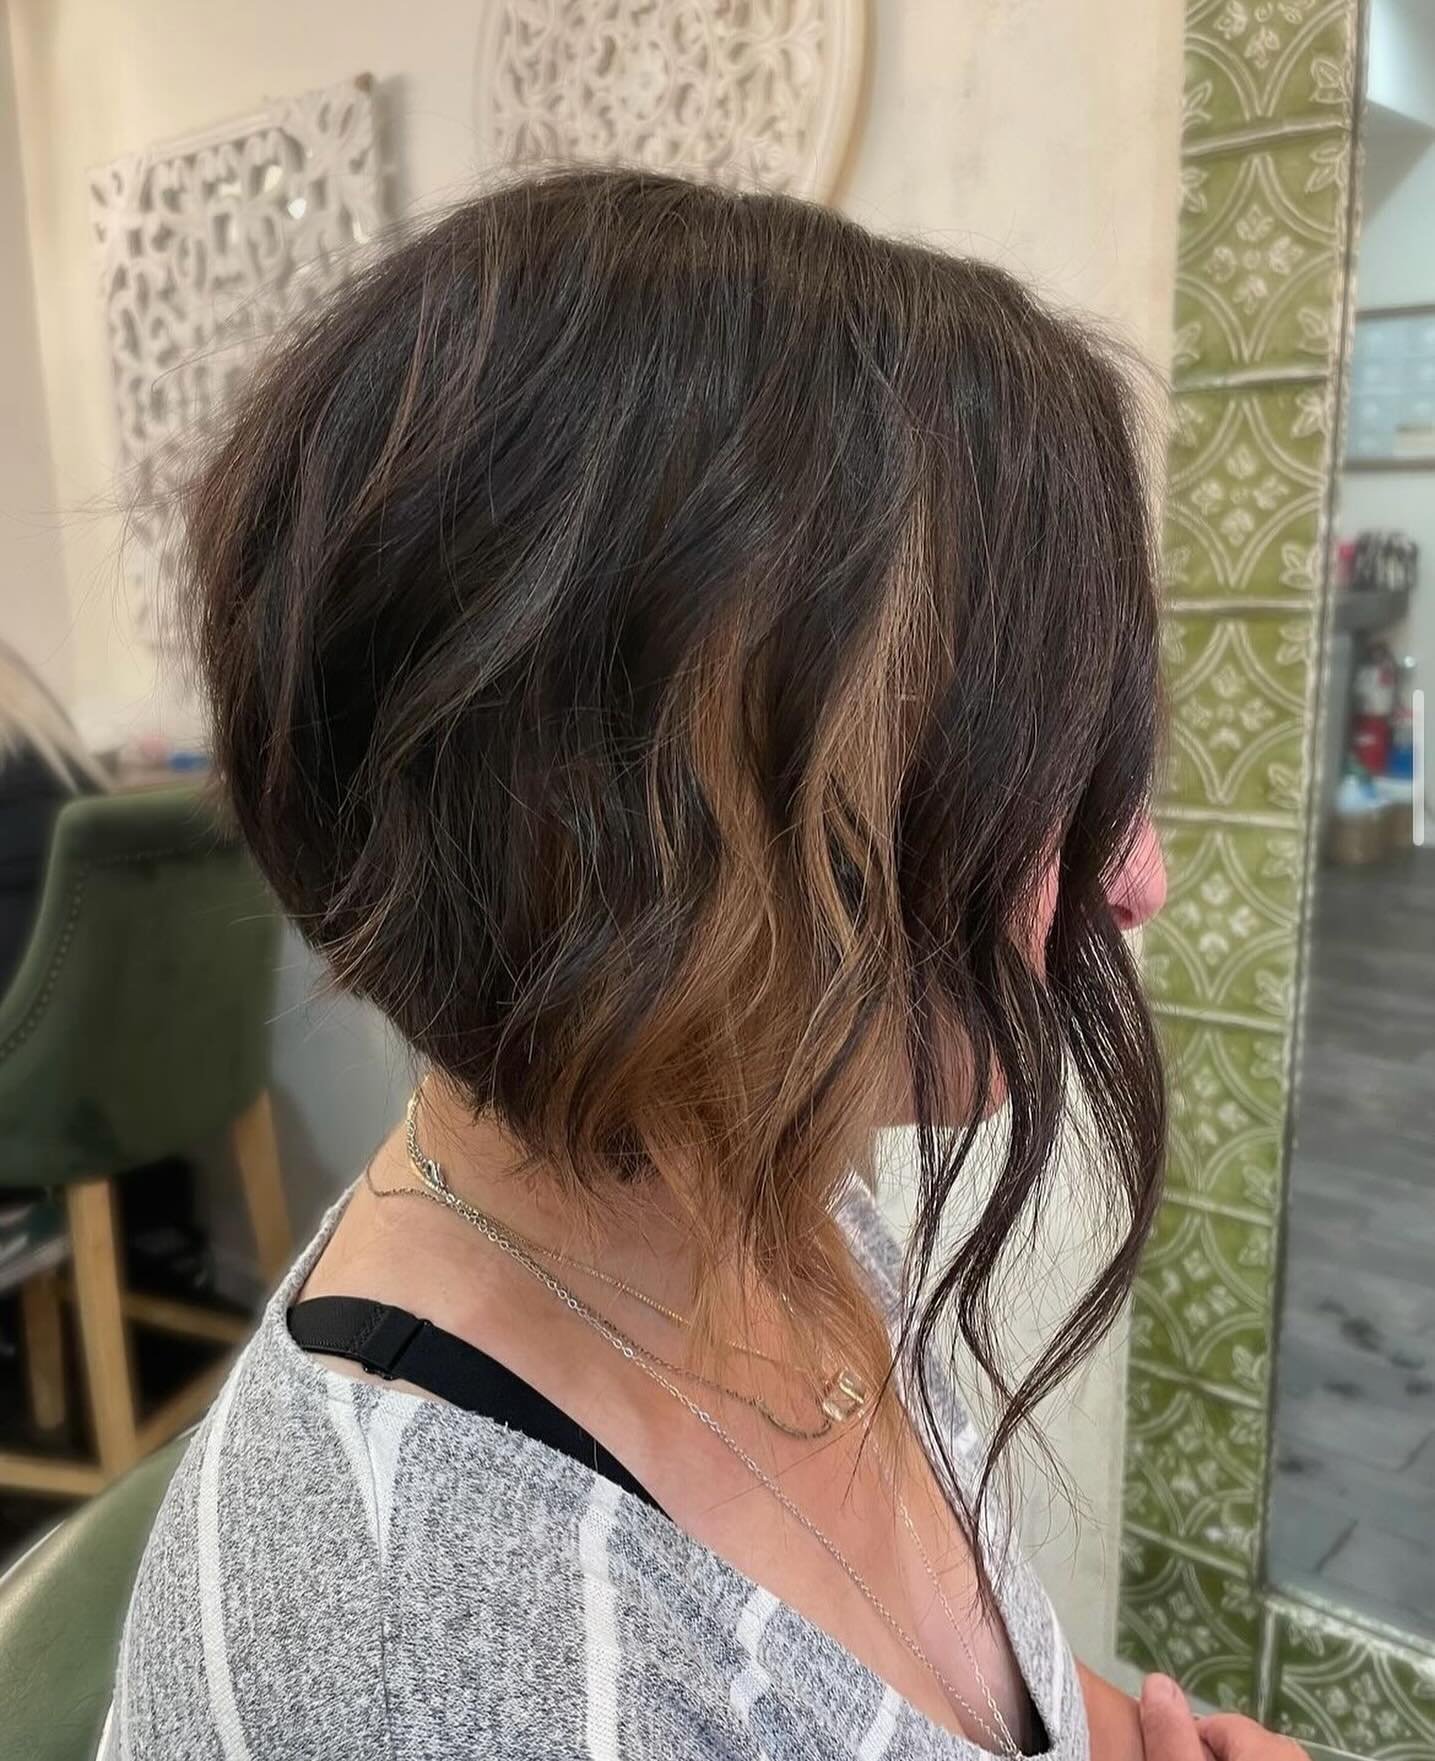 Wavy peekaboo highlights adding that perfect pop of color to a chic razor-cut bob. 💇&zwj;♀️✨ 

Color &amp; Cut by Jasmine ✂️ @jasminep_hairstylist